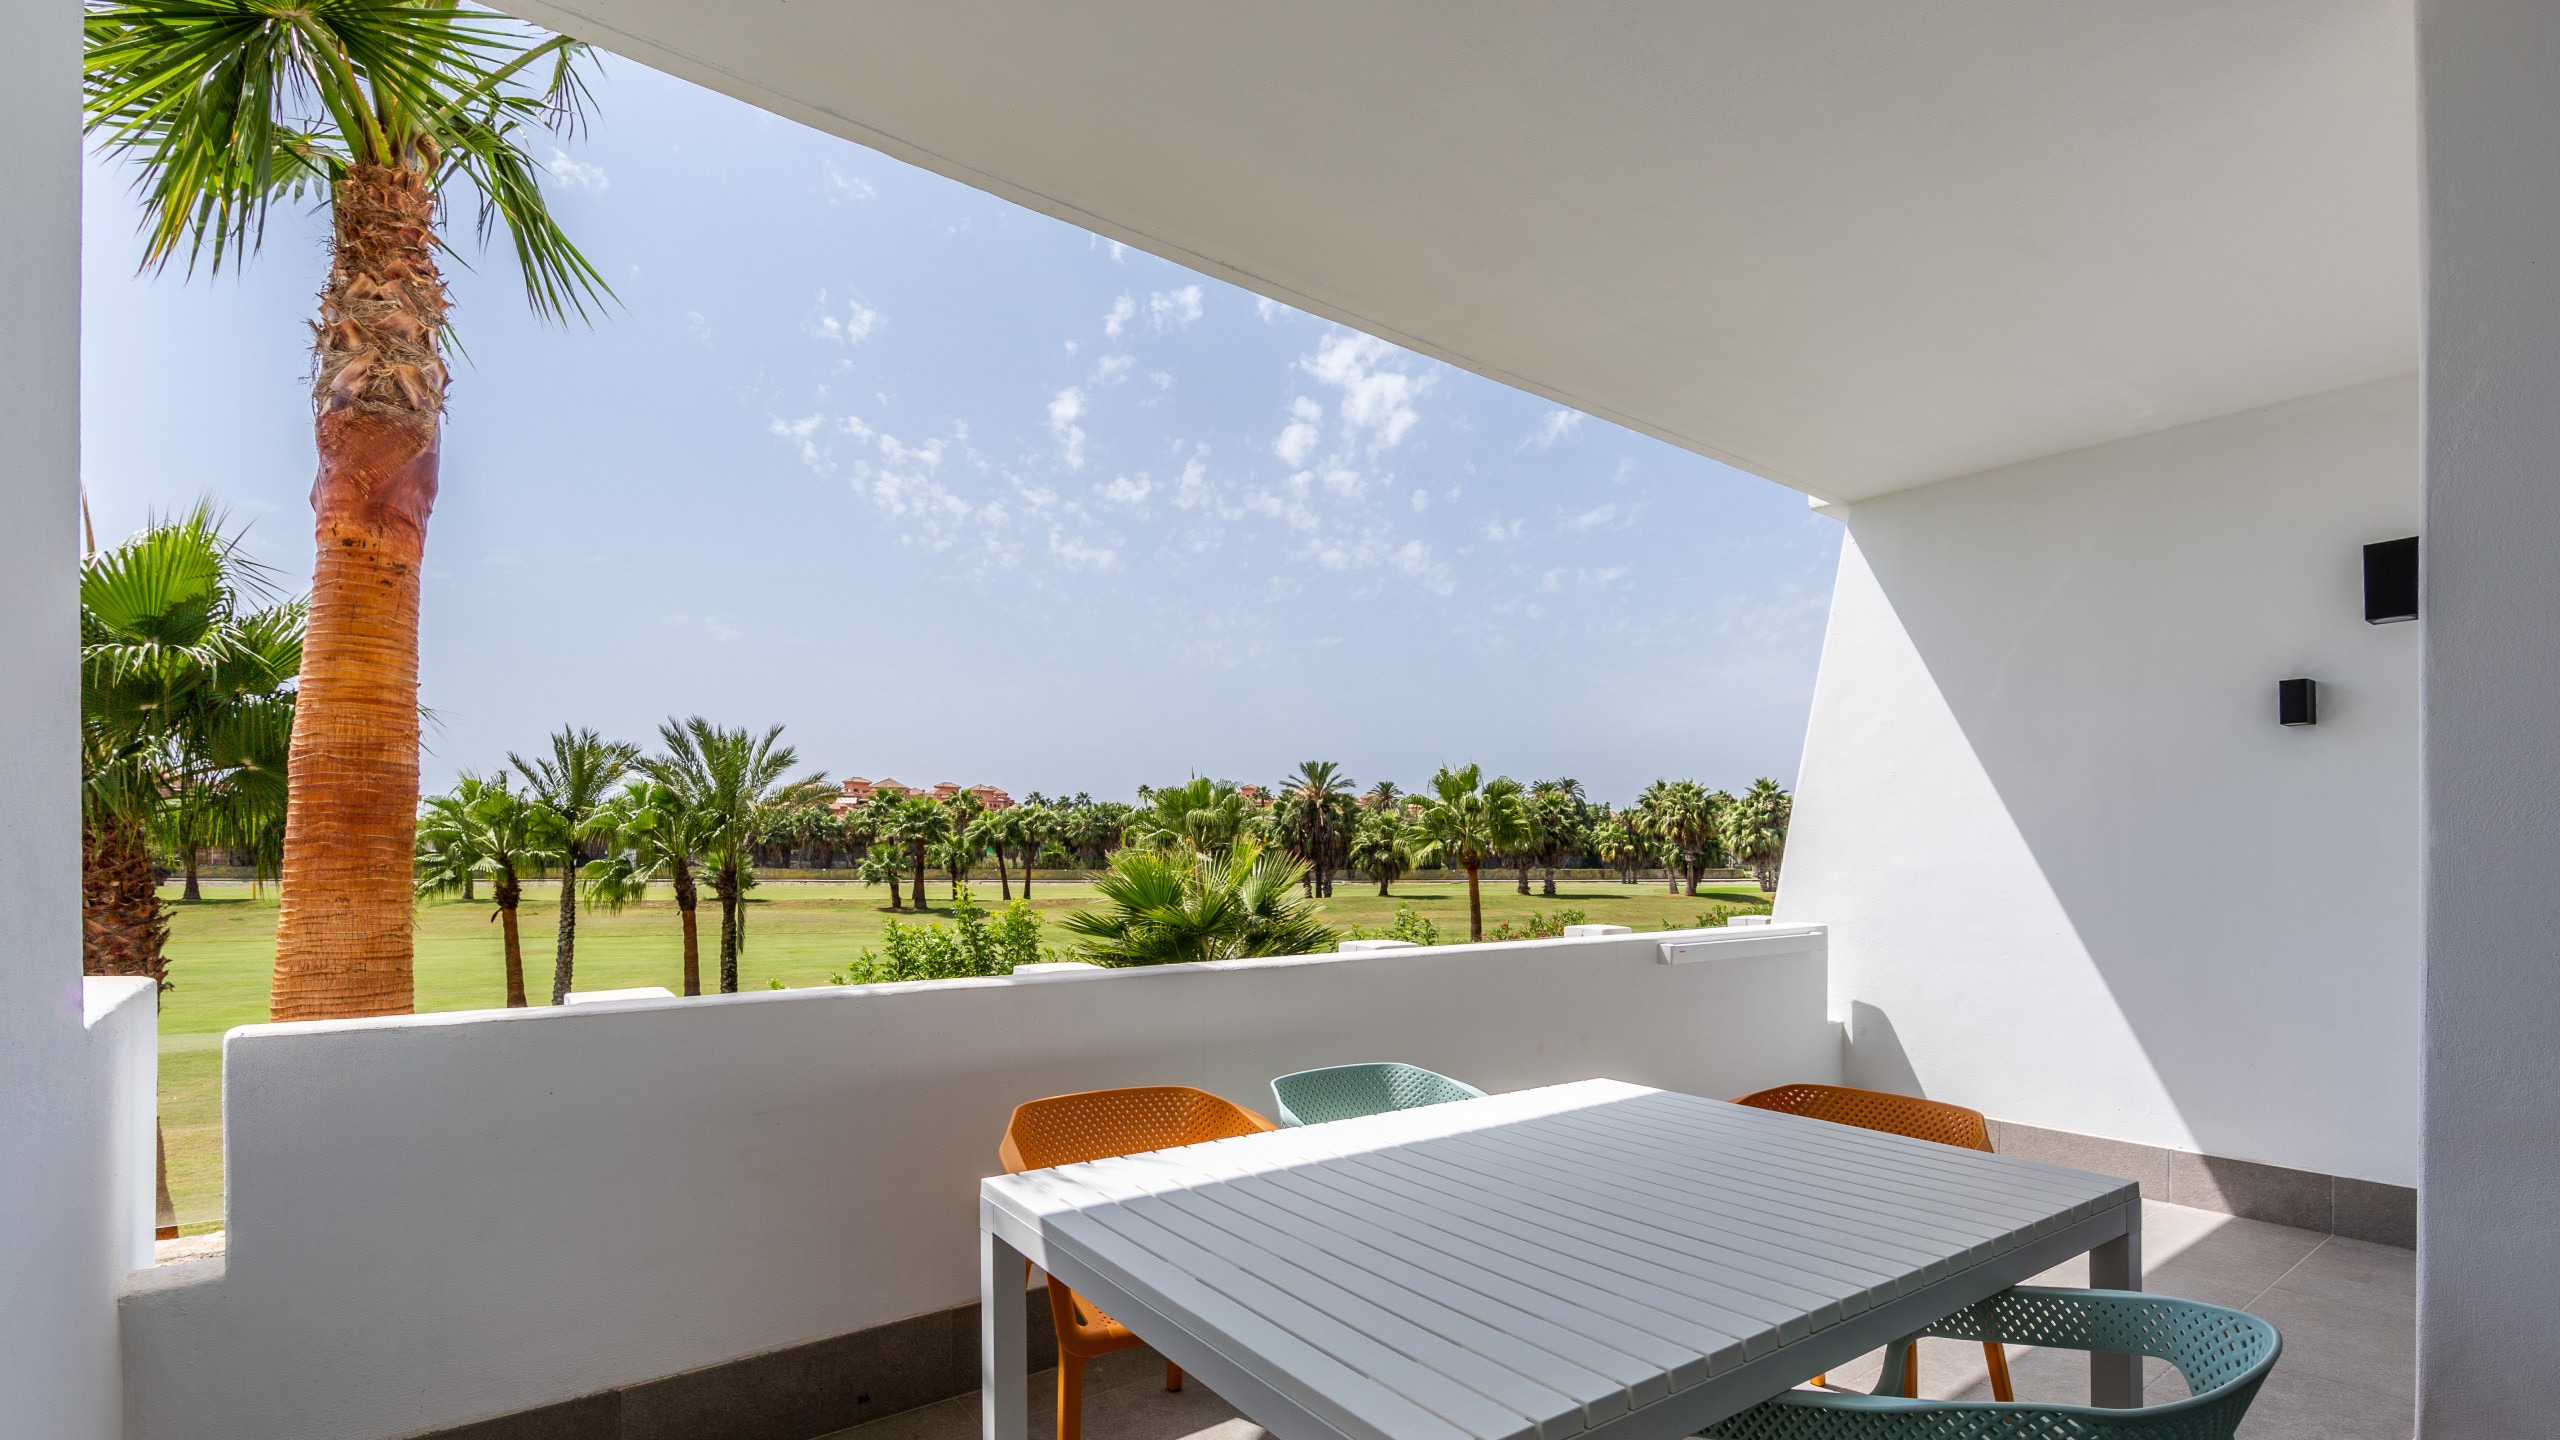 Property Image 1 - 2 bedroom apartment in Playa Granada with spectacular golf views and kitchen island